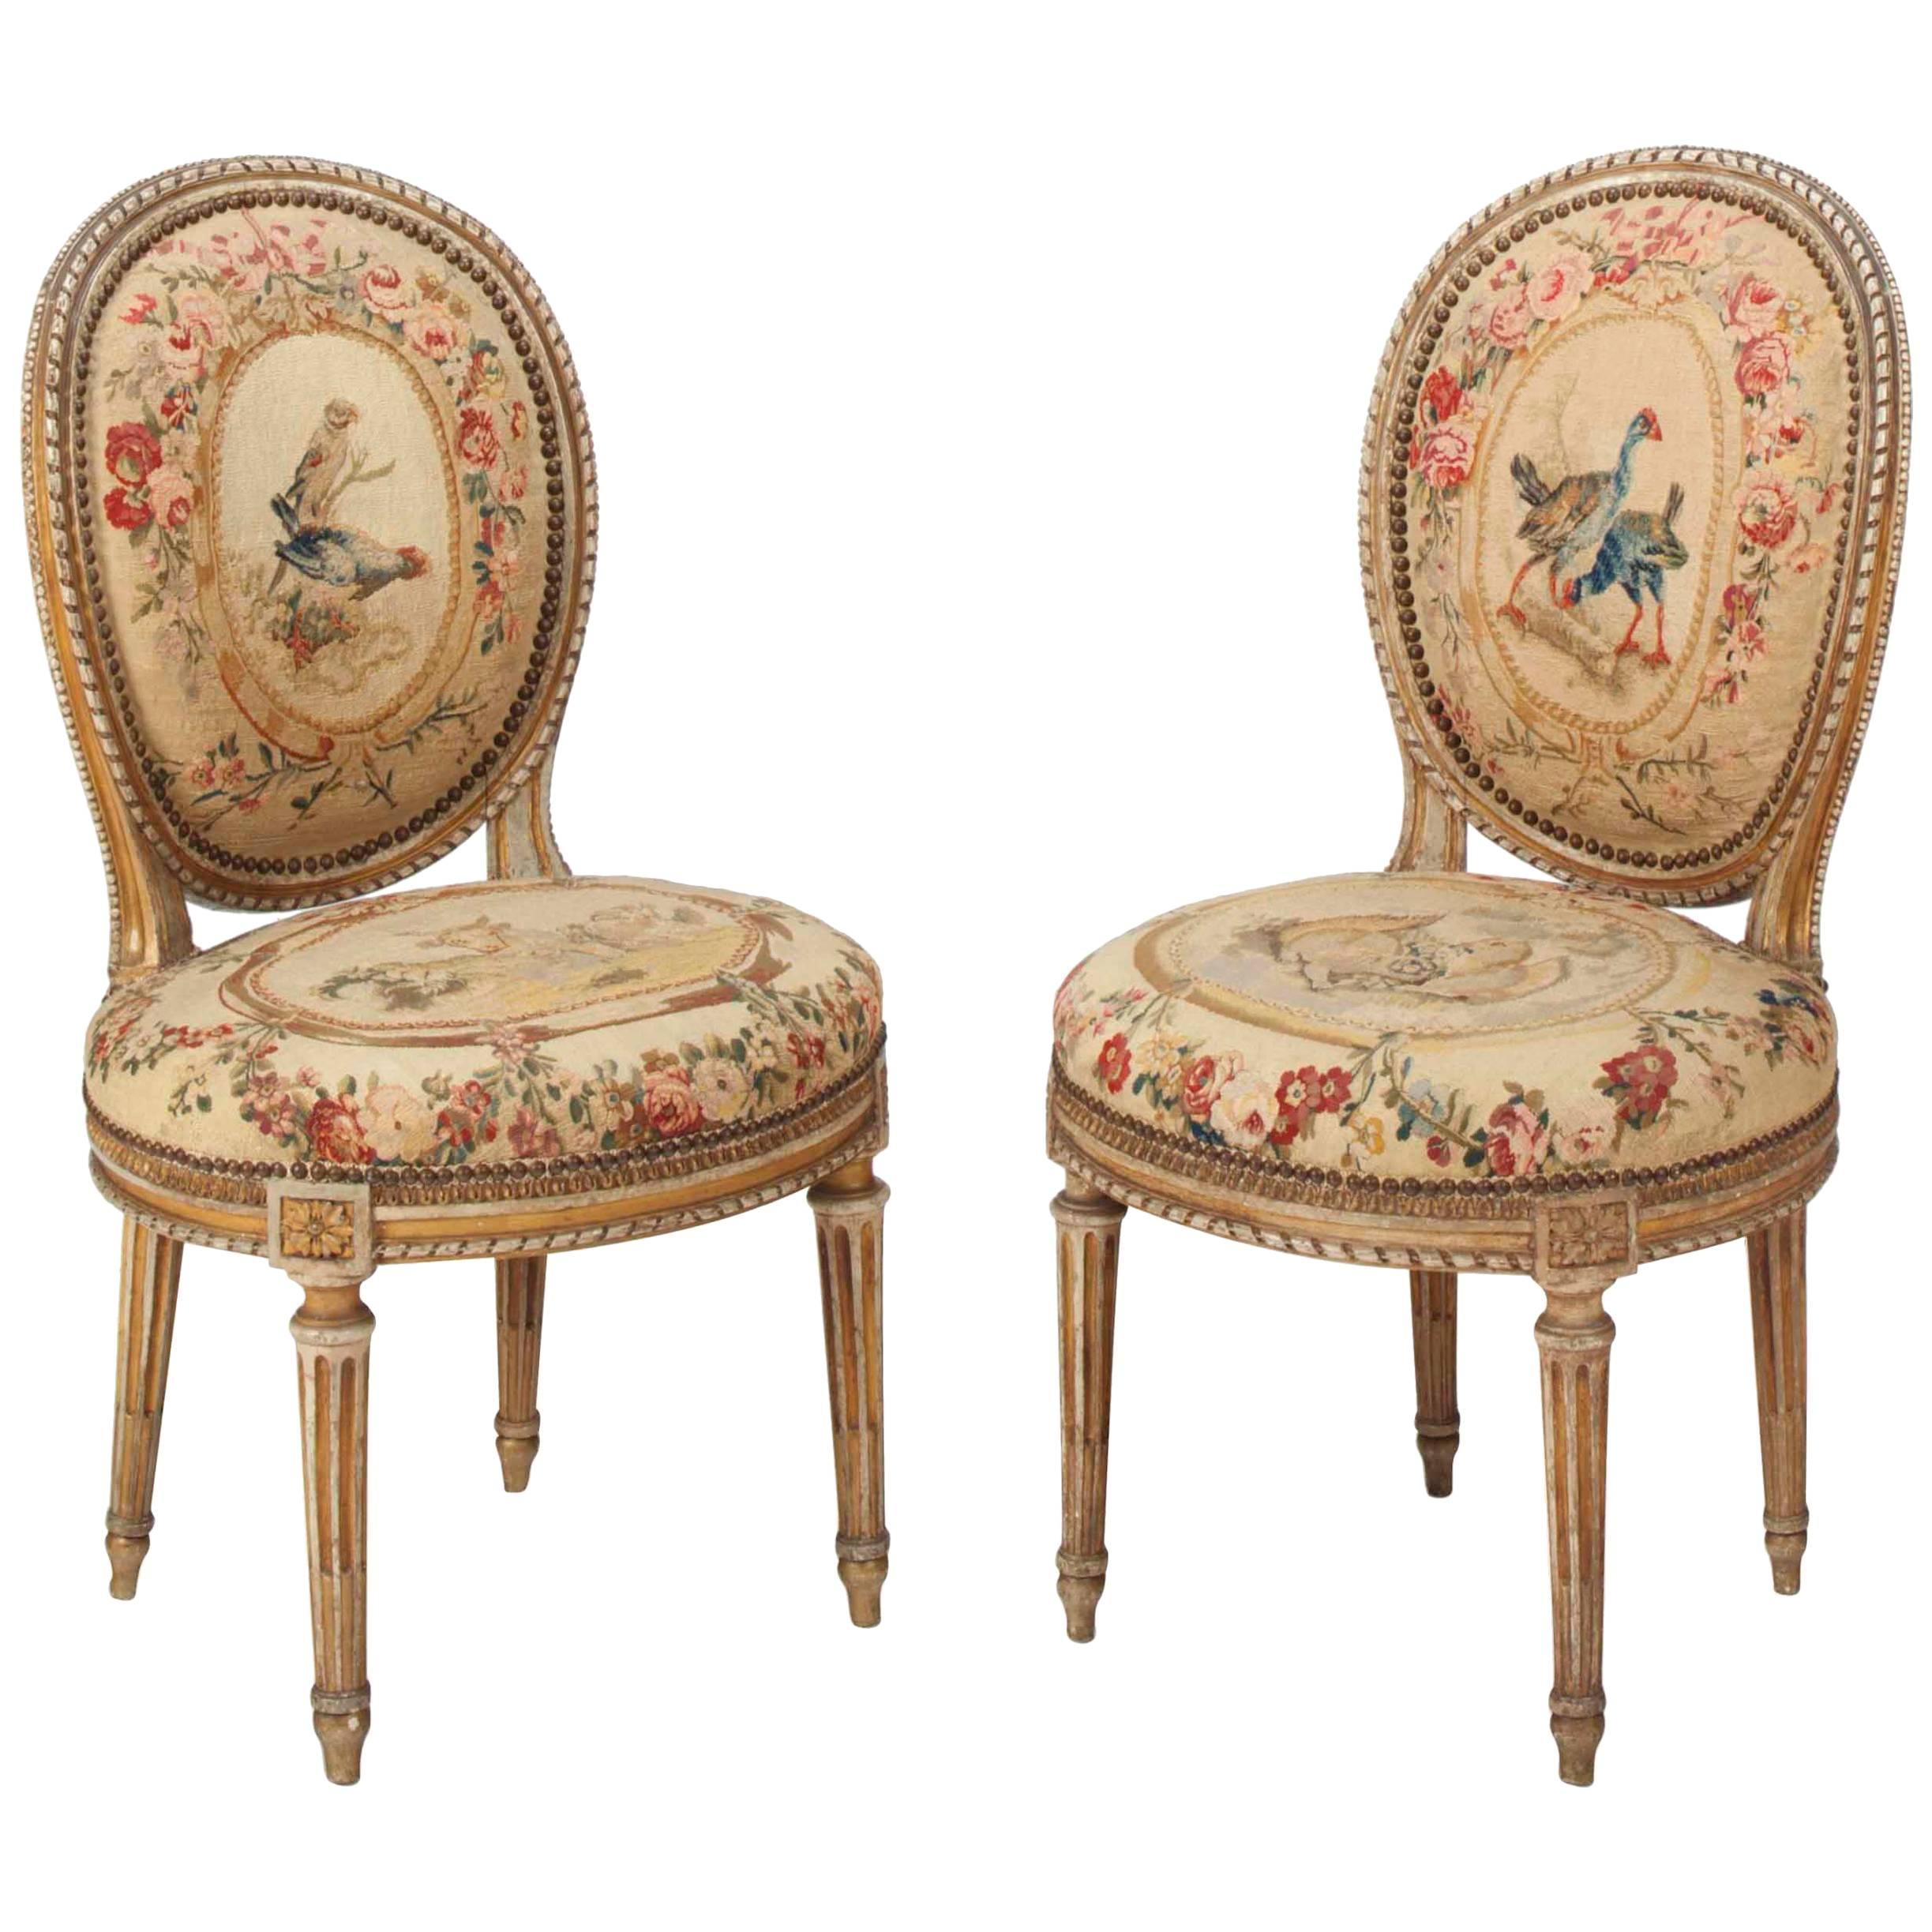 A Pair of French Cream Painted Louis XVI Chairs by Georges Jacob, circa 1780